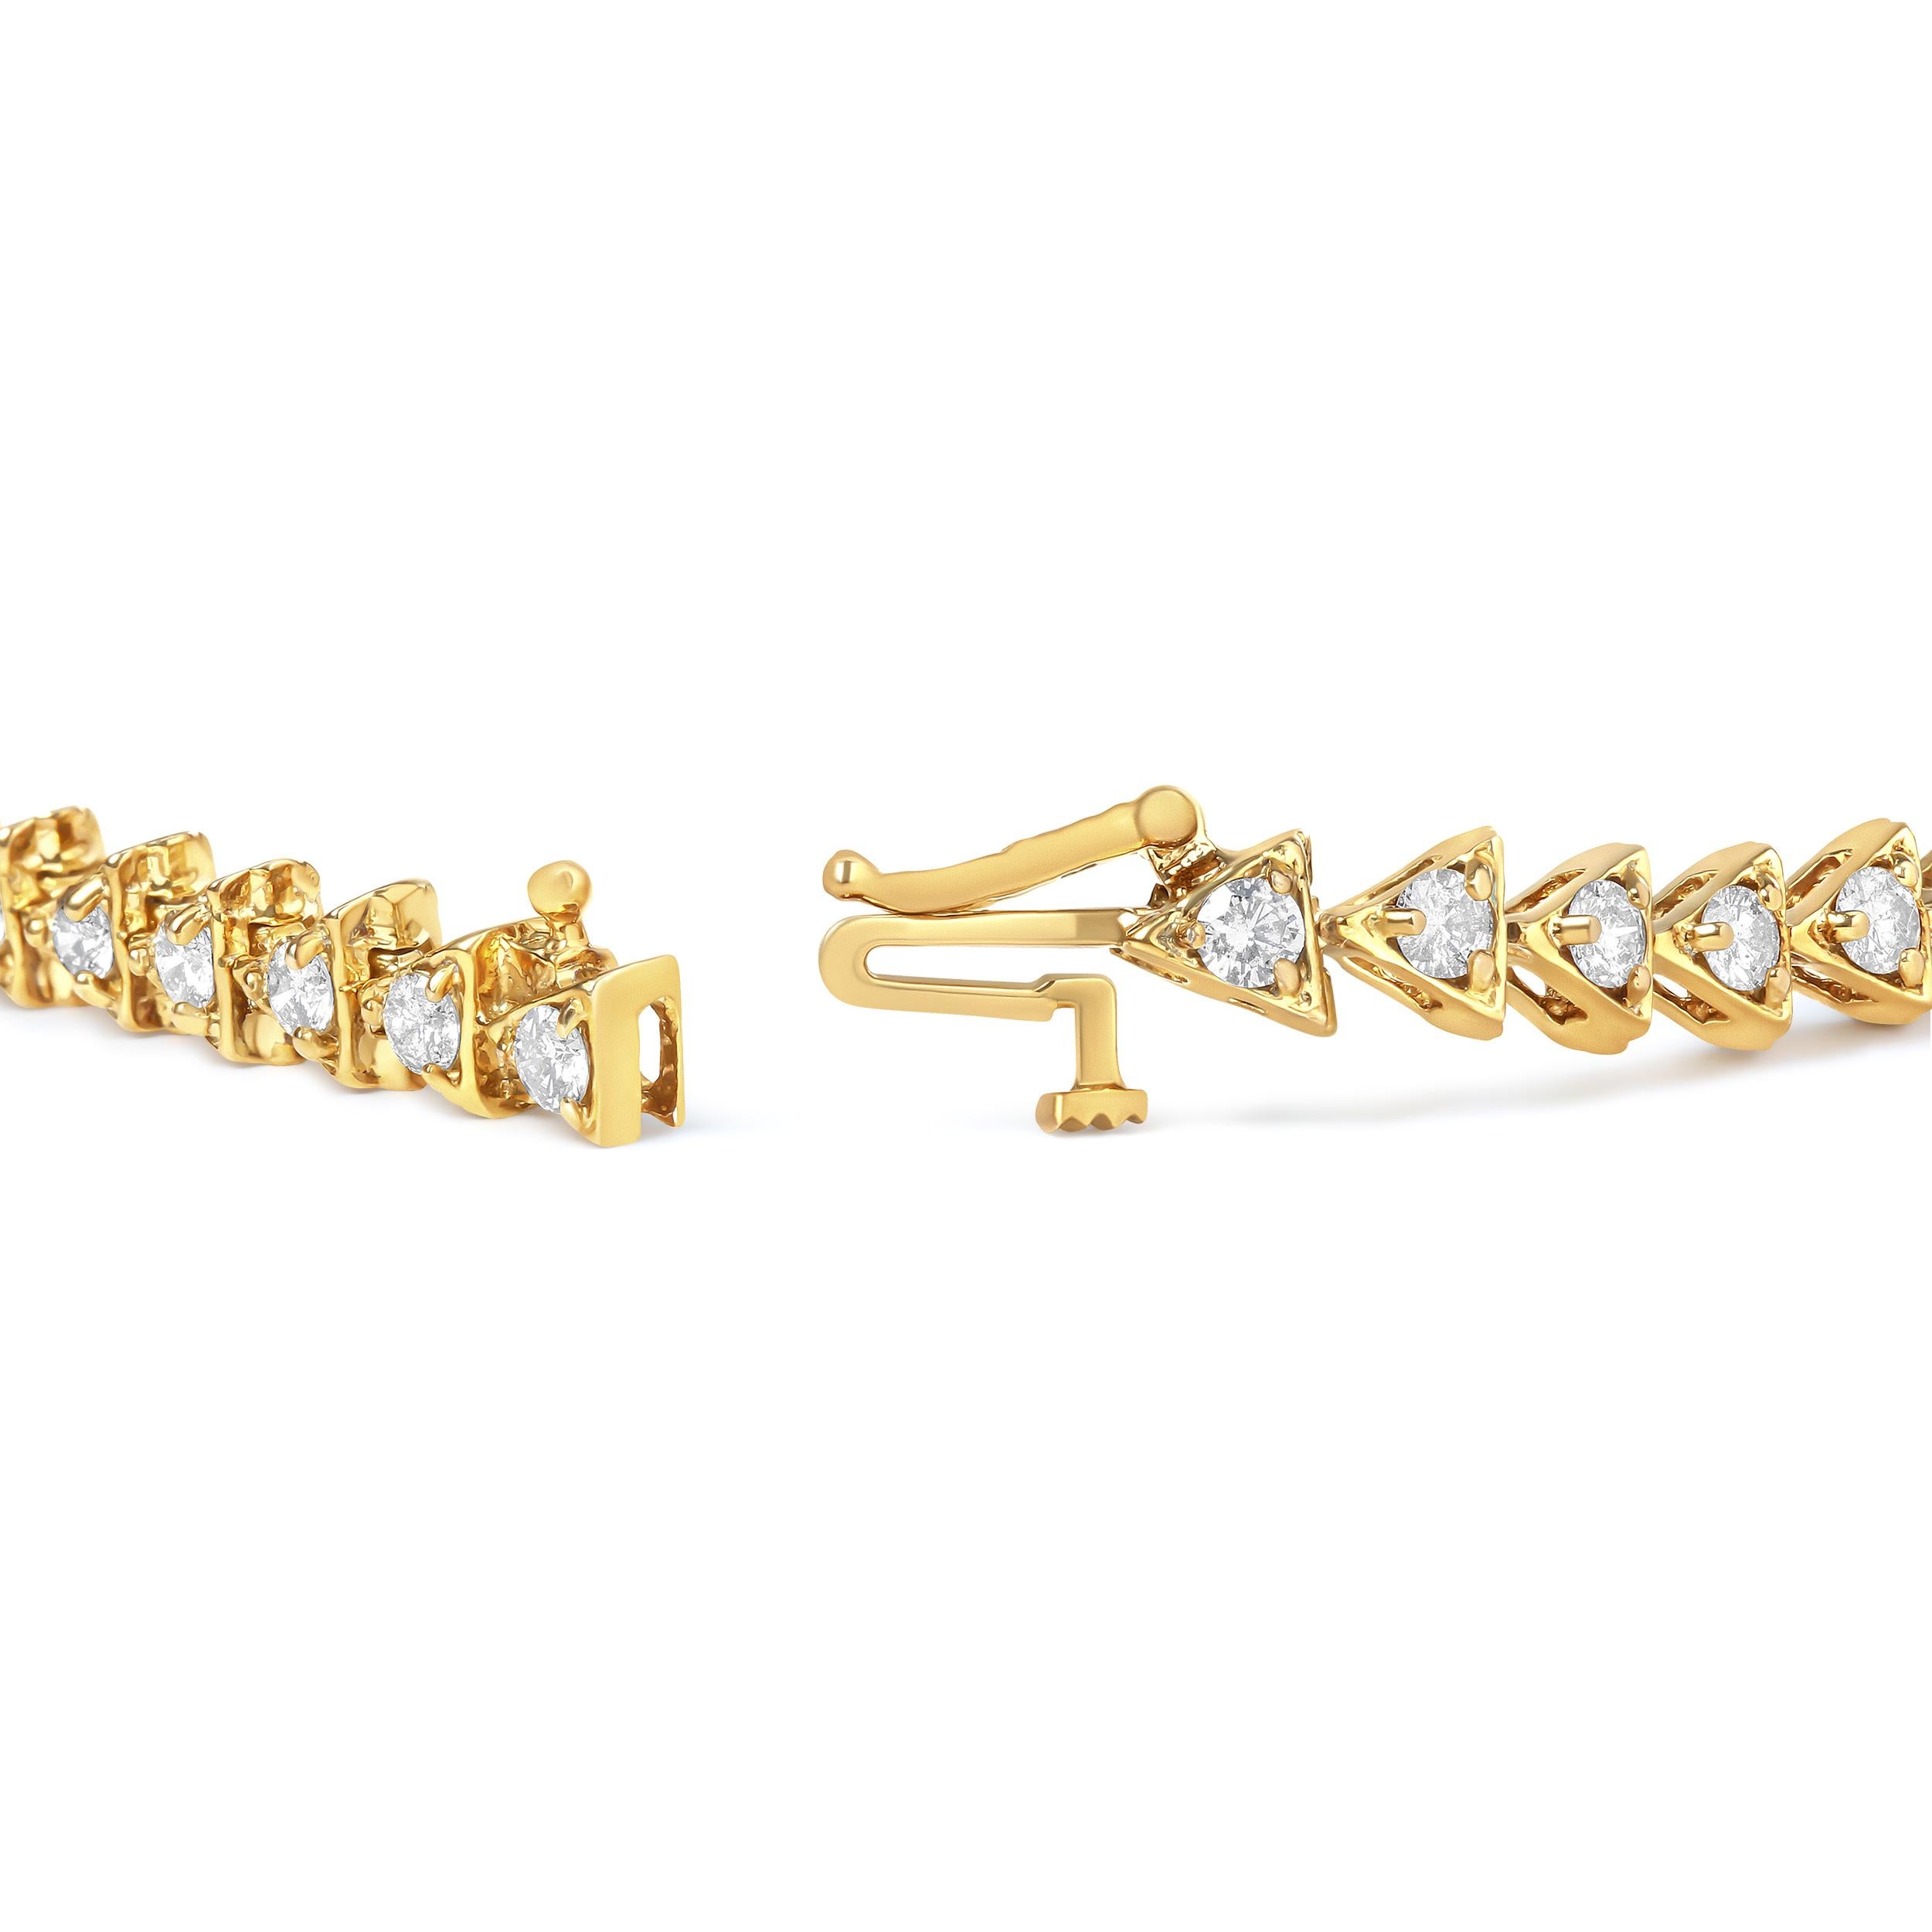 Our bracelet is the perfect way to add a touch of sparkle to your everyday wardrobe. The bracelet features 10K yellow gold plated .925 sterling silver links, each shaped like a triangle and set with a natural diamond. The 3.0 Cttw of diamonds are